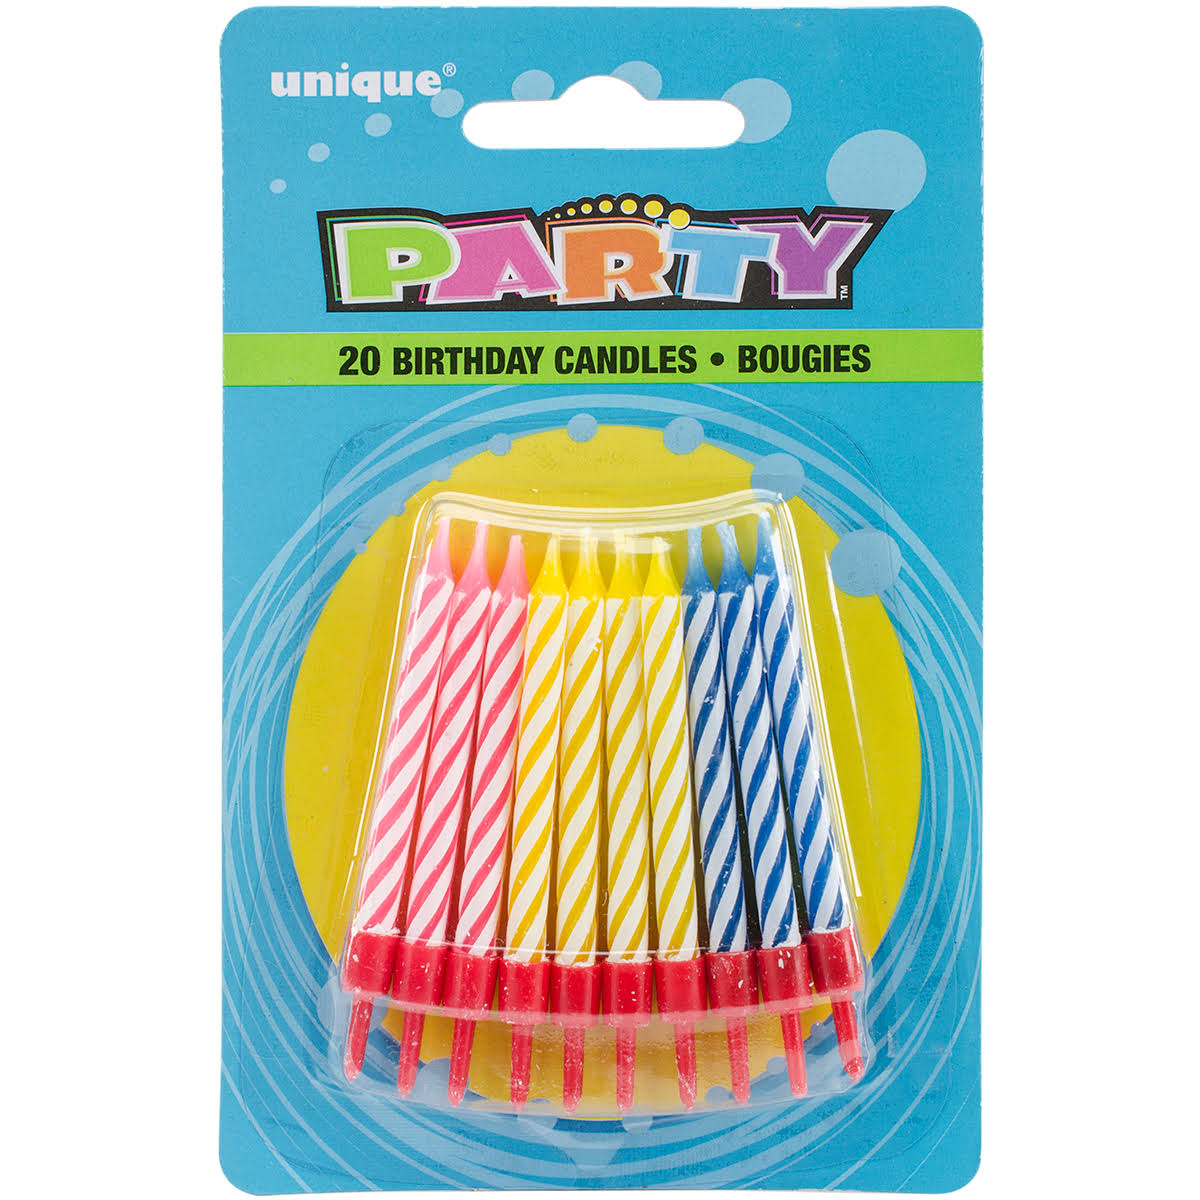 Unique Spiral Birthday Candles in Holders - 20ct